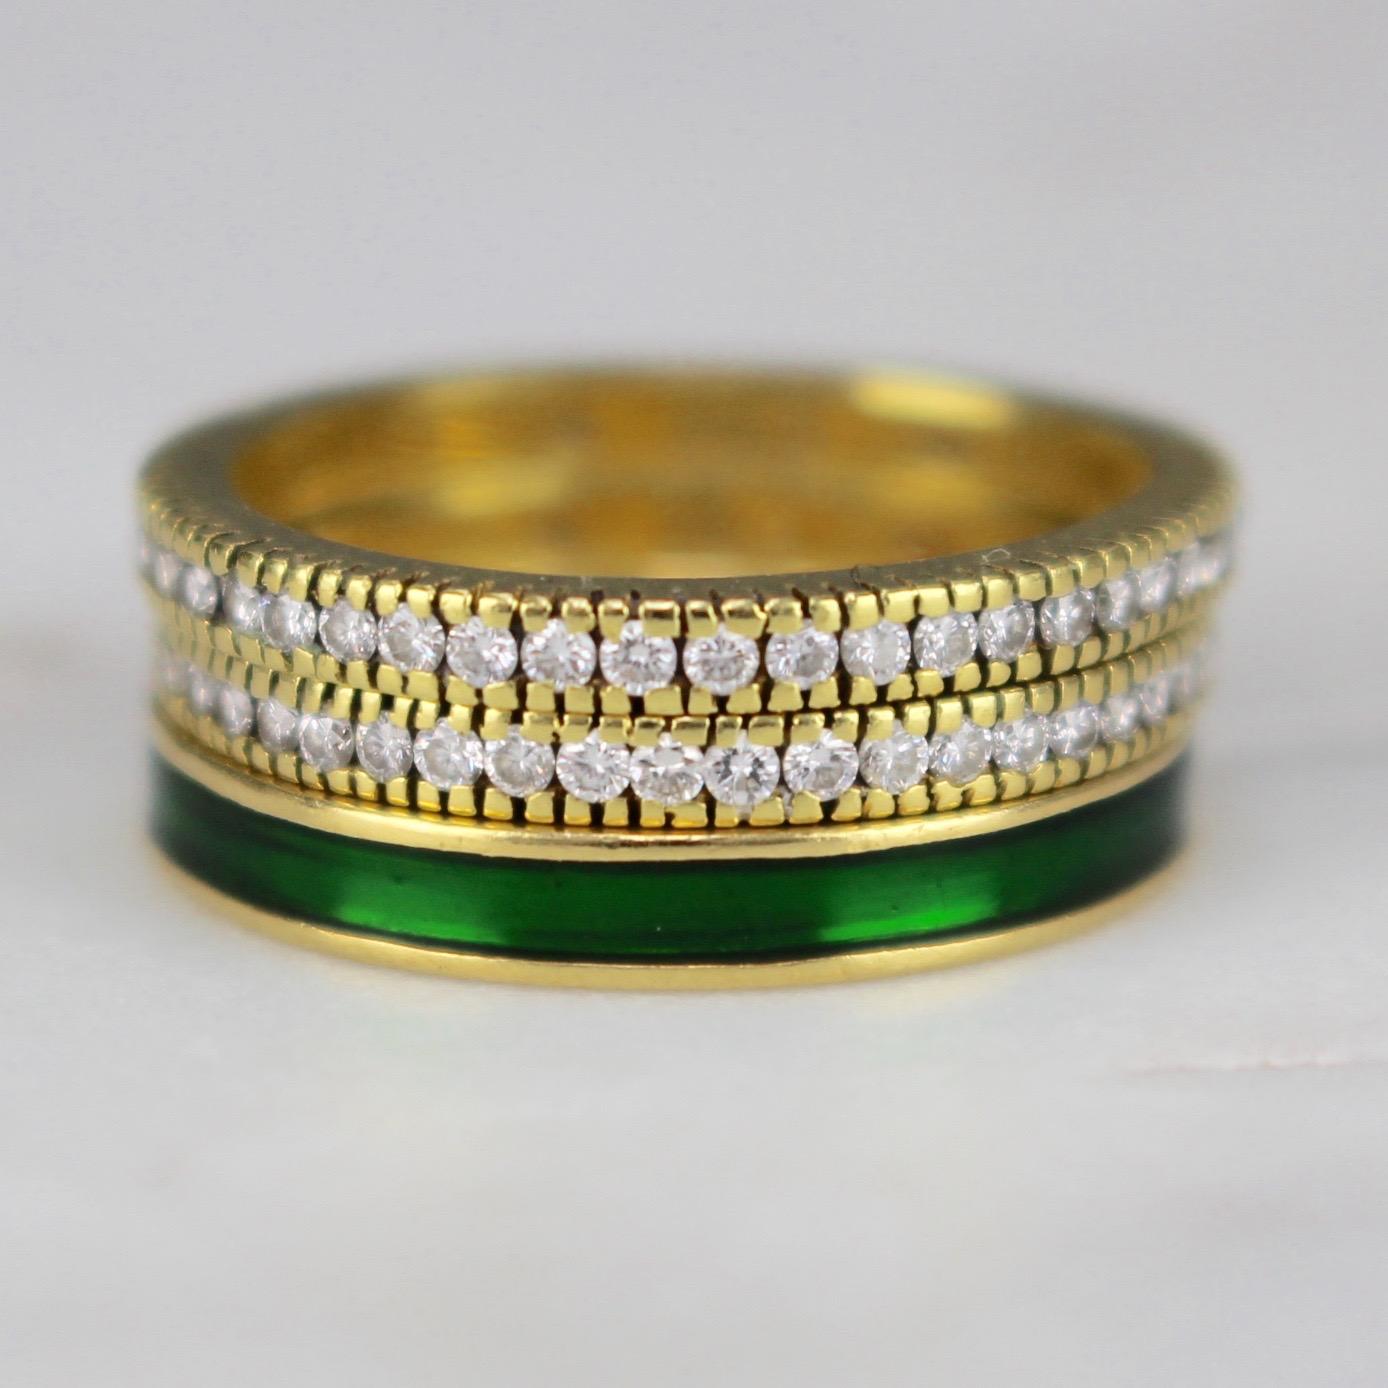 British Stack Rings with Green Enamel and Diamonds, circa 1990s